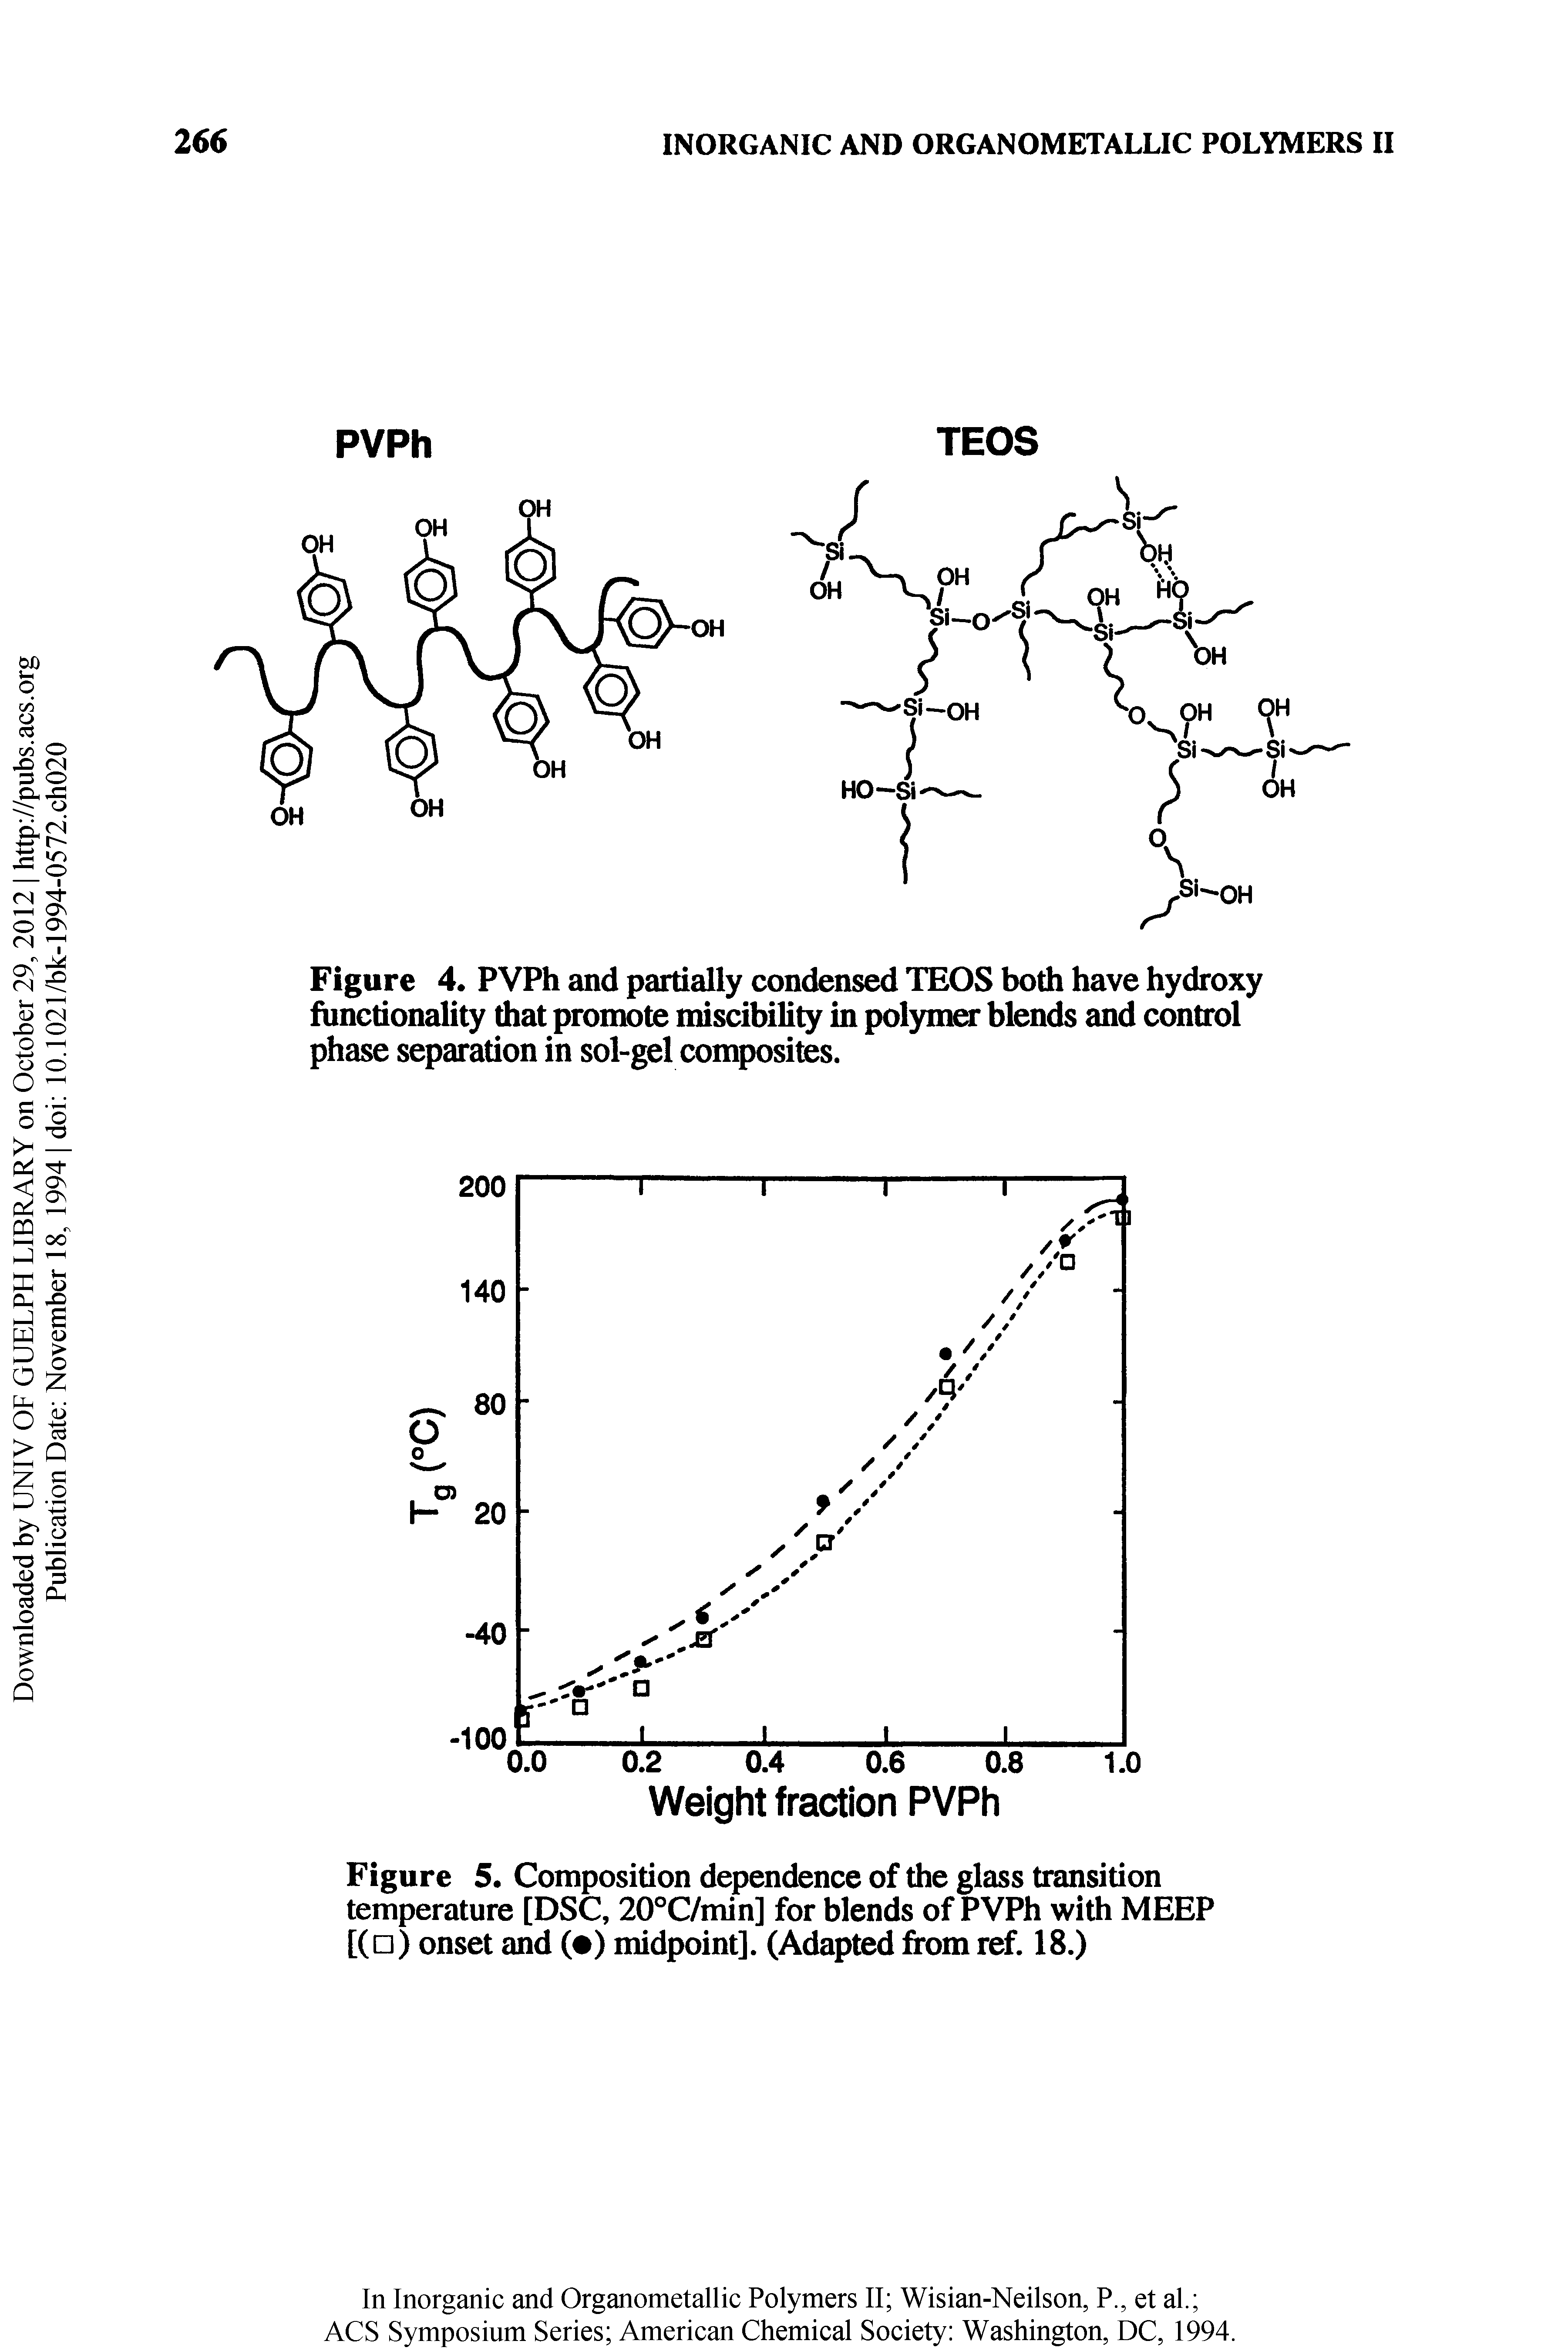 Figure 4. PVPh and partially condensed TEOS both have hydroxy functionality that promote miscibility in polym blends and control phase separation in sol-gel composites.